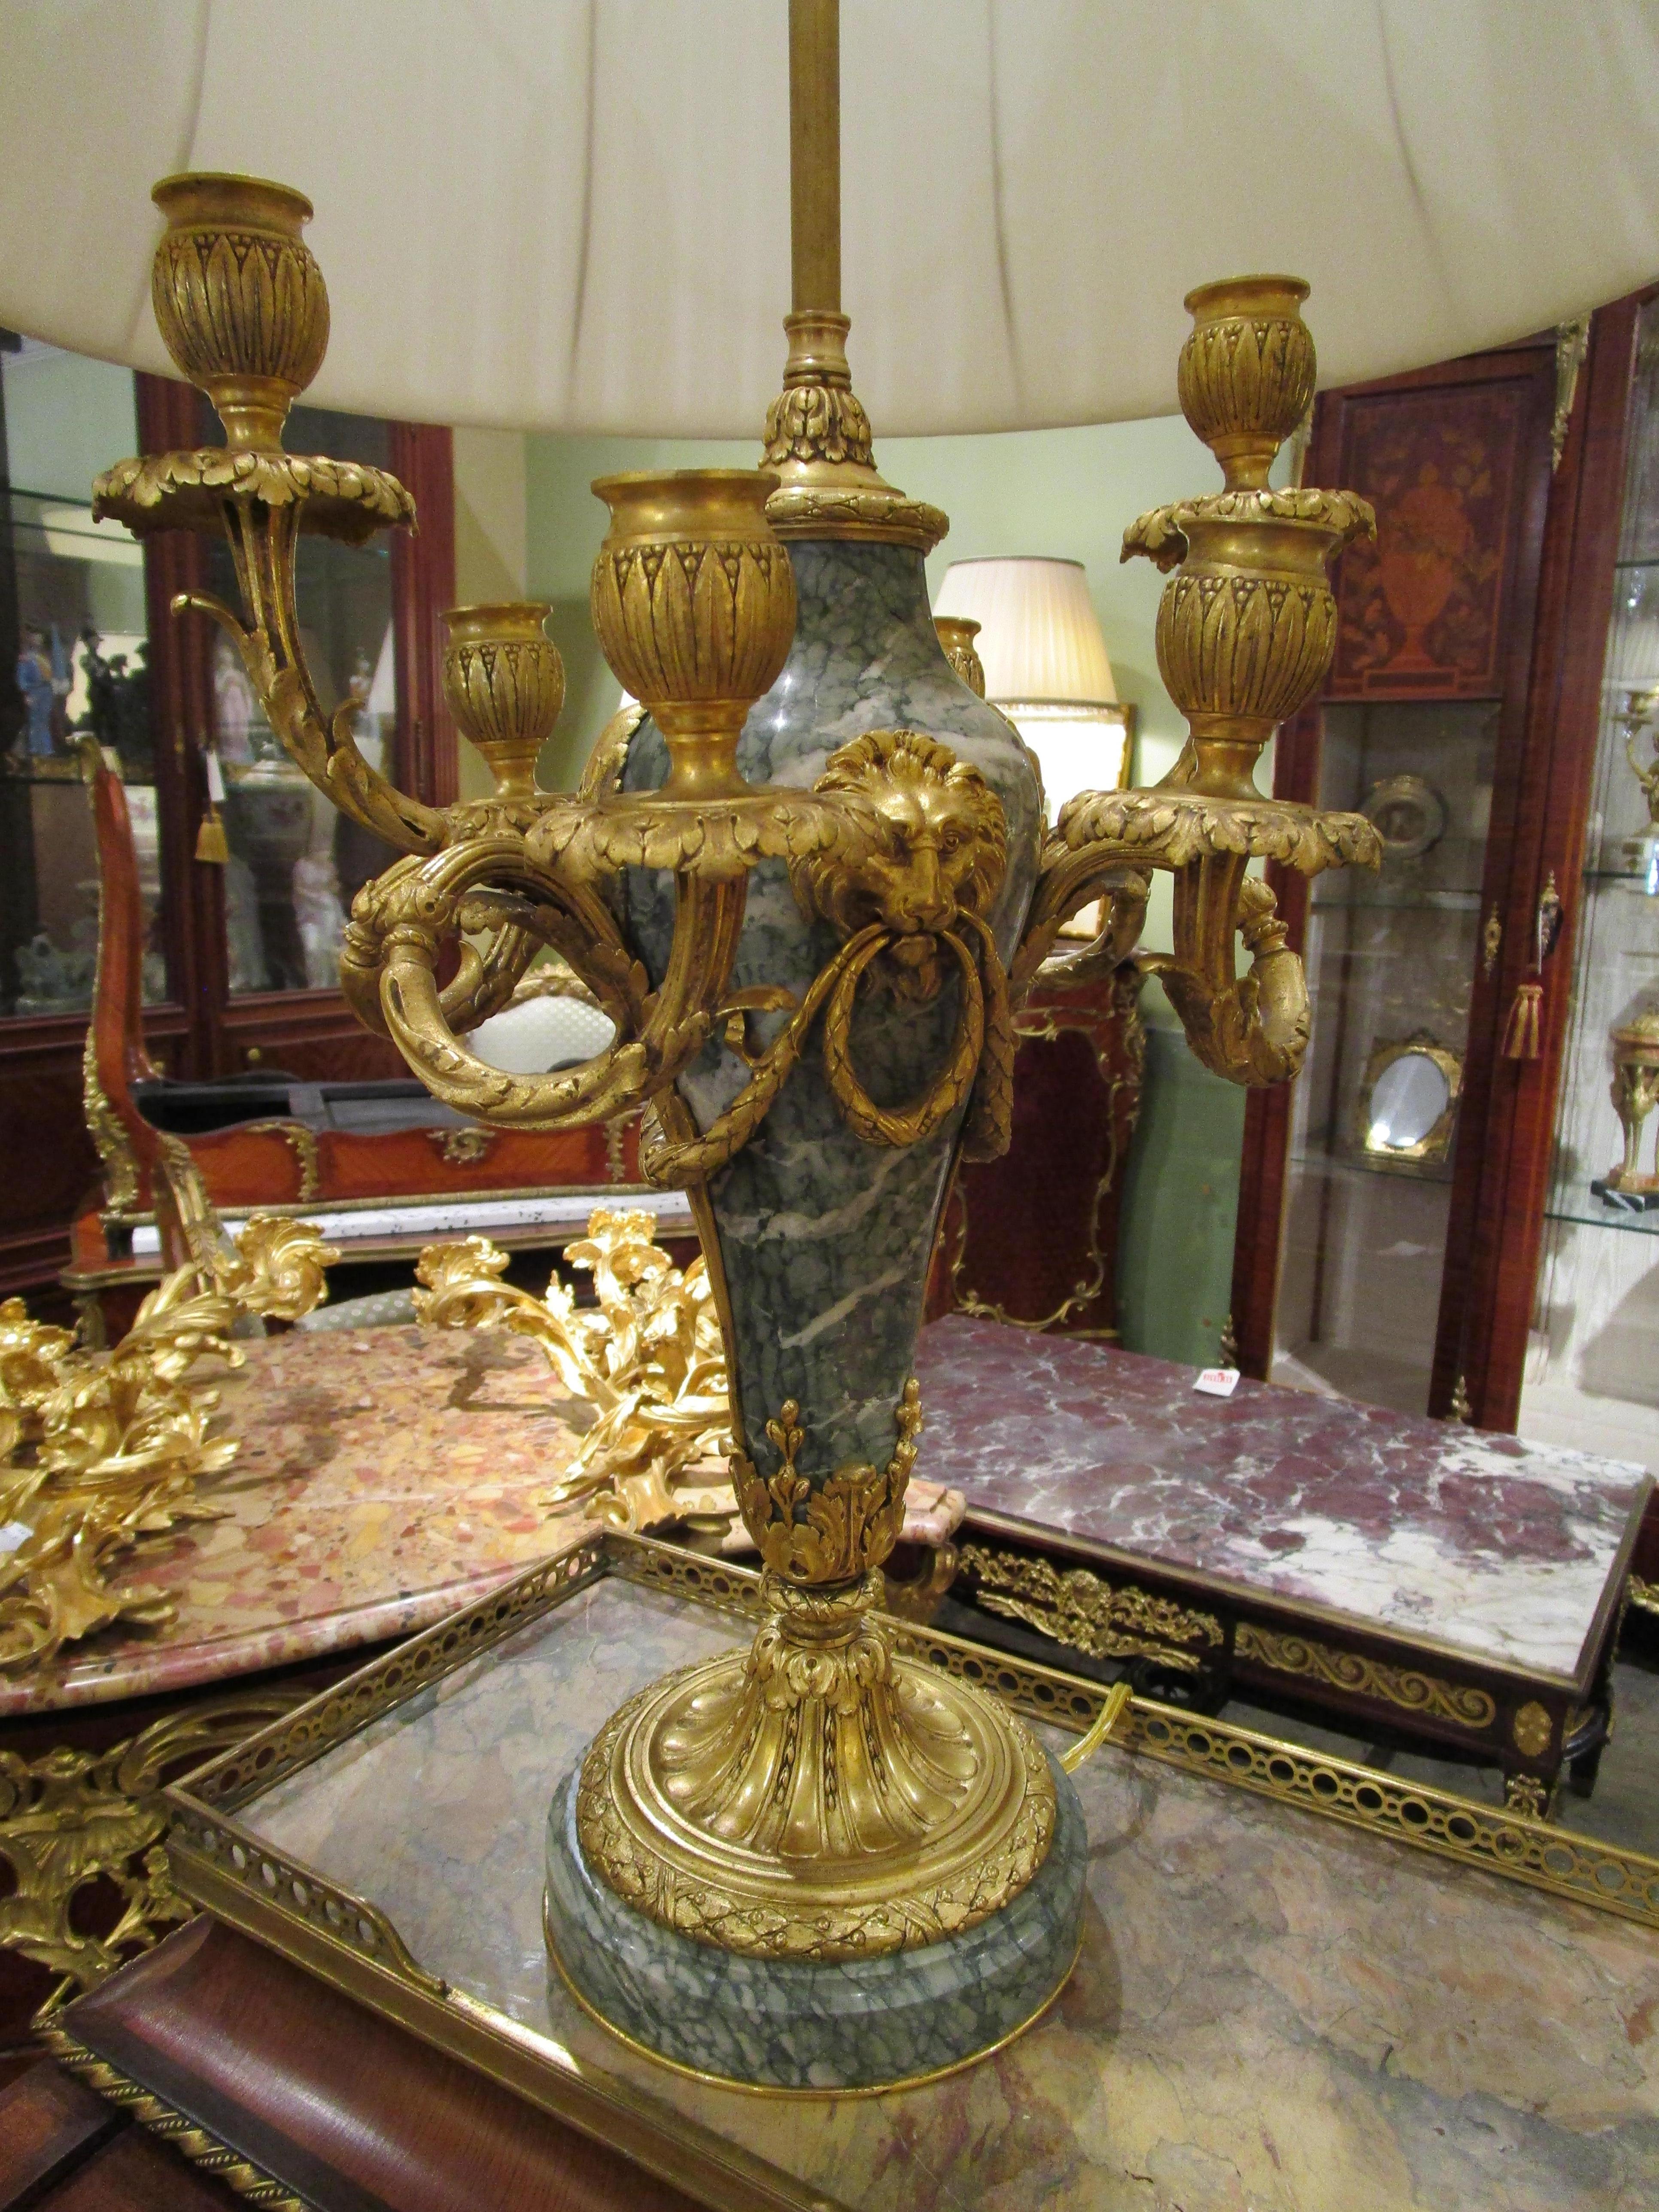 A very fine pair of 19th century French Louis XVI marble and gilt bronze mounted Candelabra lamps. Finest gilt bronze details with a lions head mask details . Made by one of the finest foundries in France in the 19th century Thiebaut Freres. 